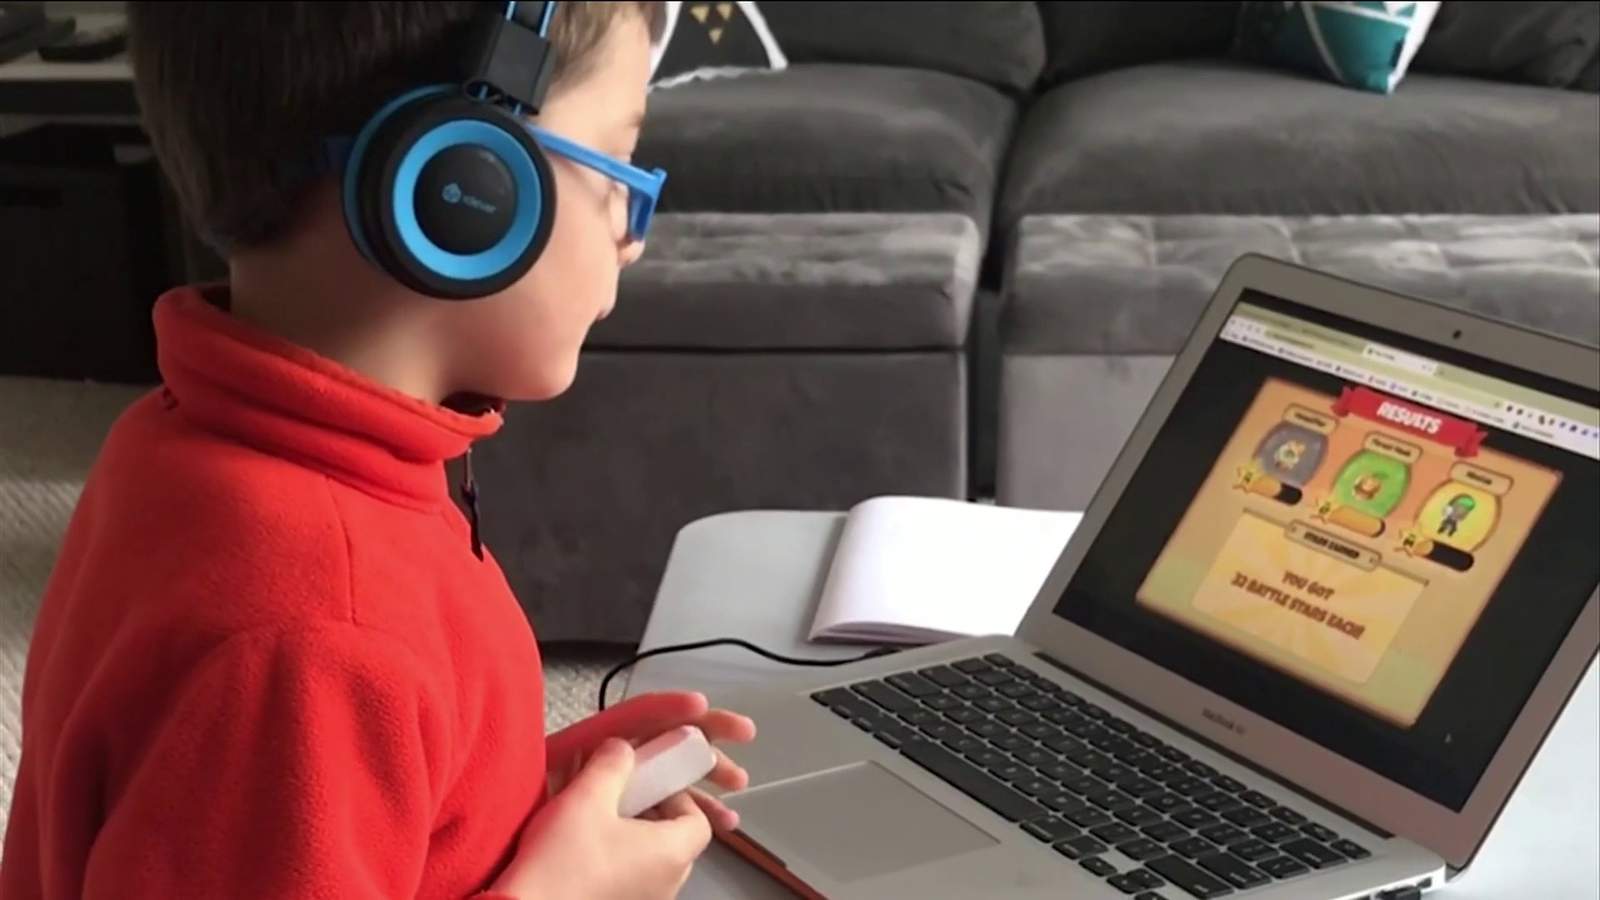 Virtual learning raises concerns about childrens vision